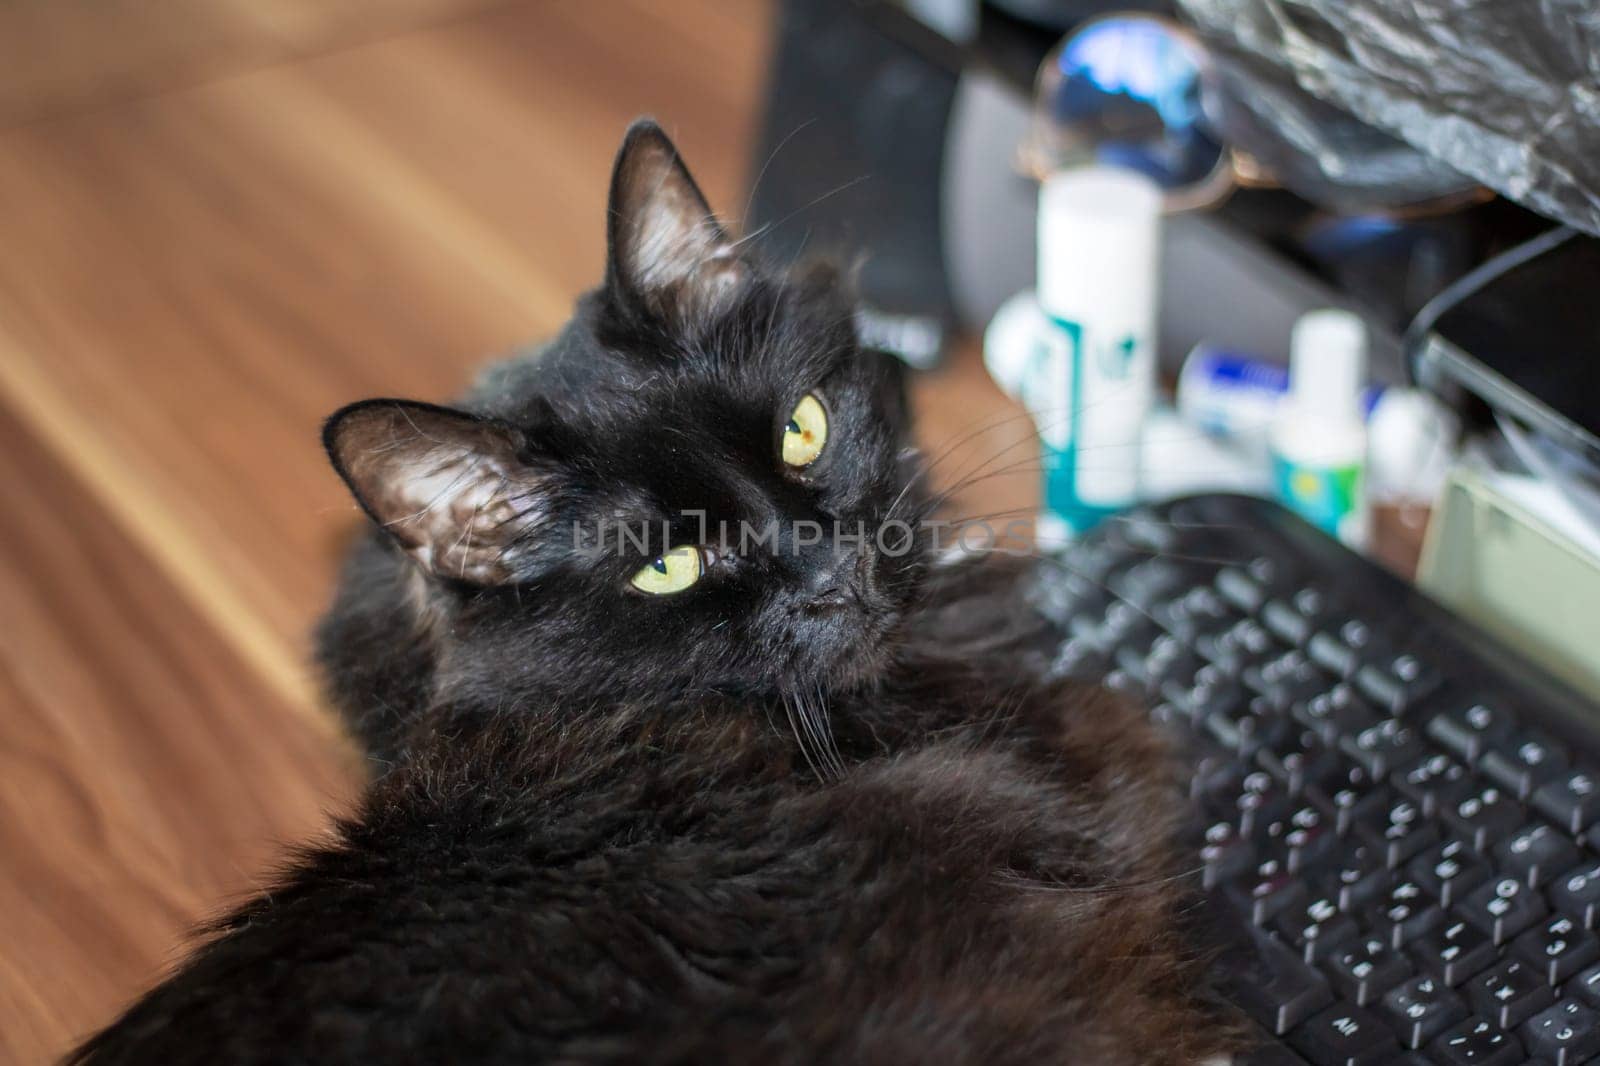 Black impudent cat lying on the keyboard close up